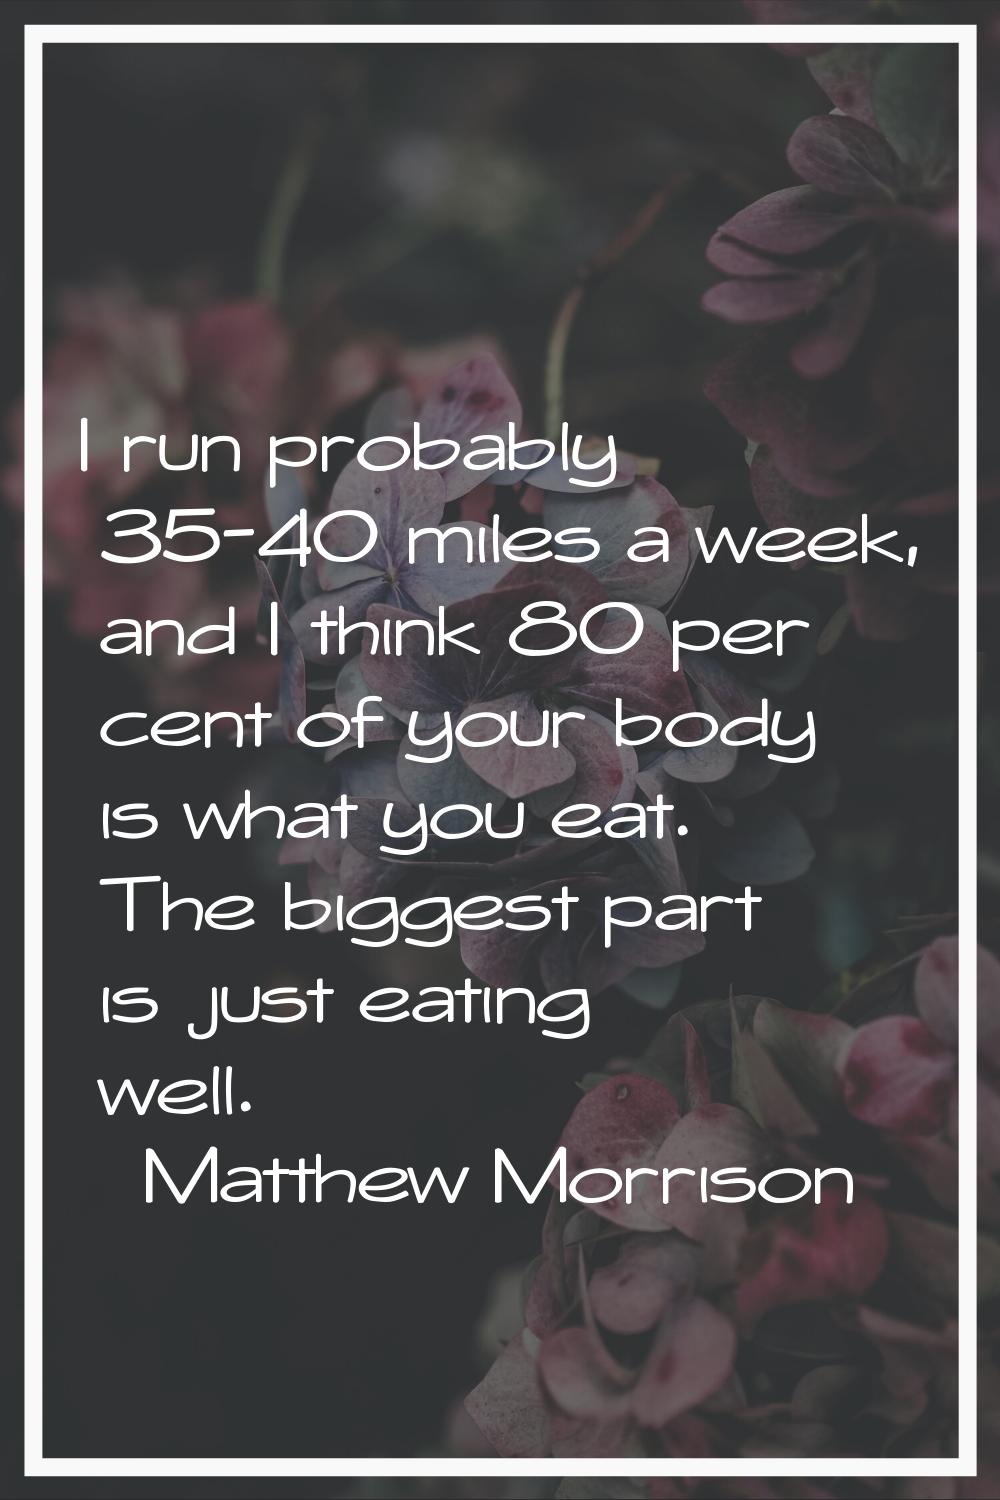 I run probably 35-40 miles a week, and I think 80 per cent of your body is what you eat. The bigges